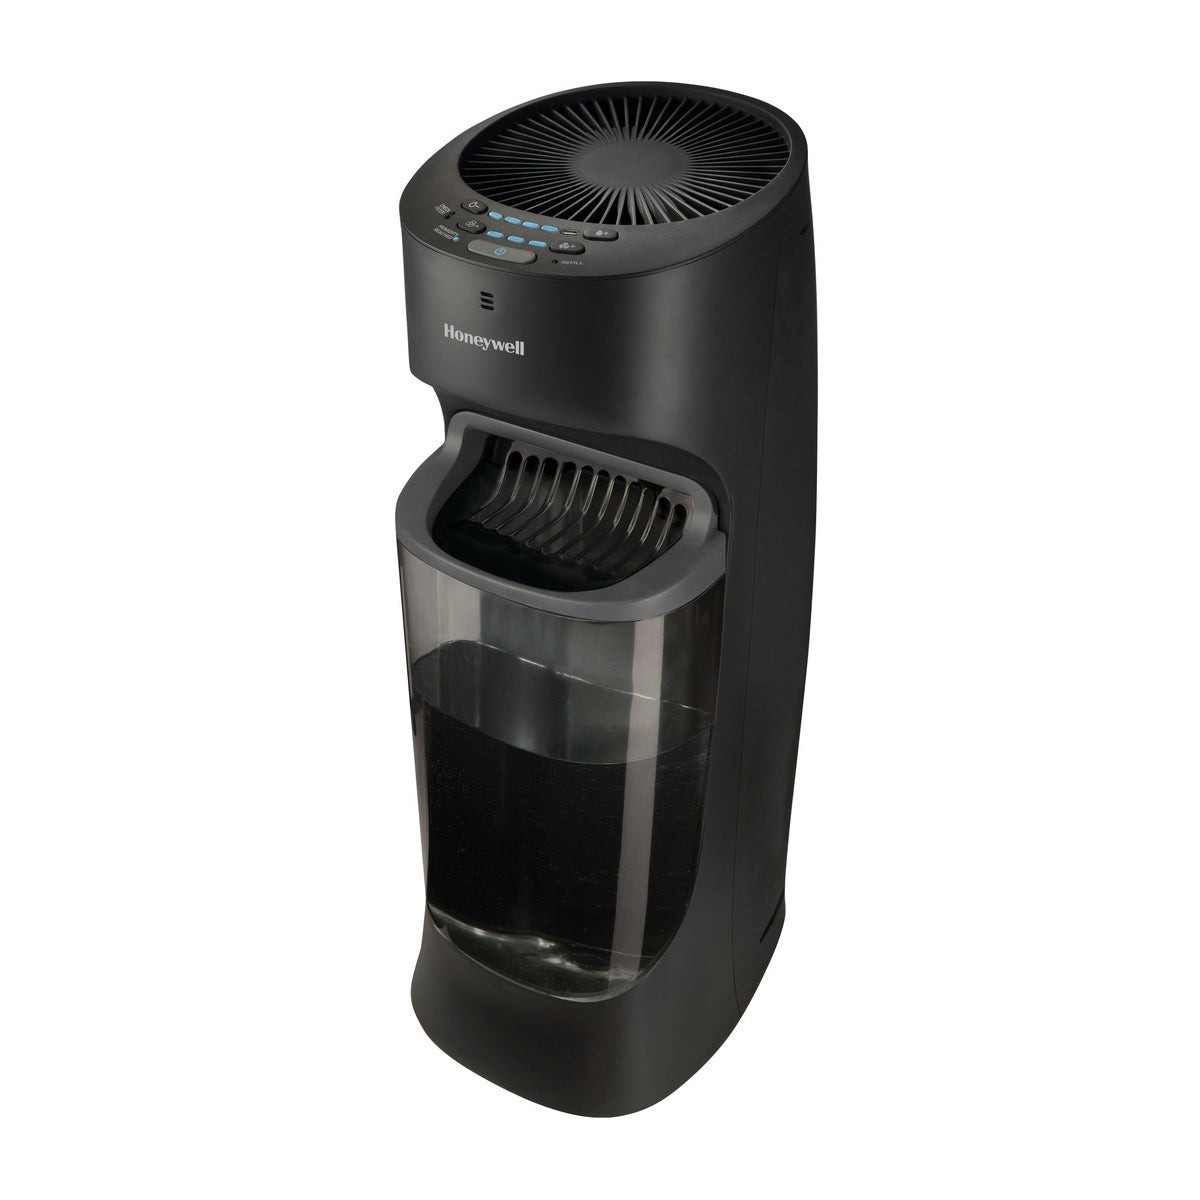 Top Fill Tower Humidifier Black